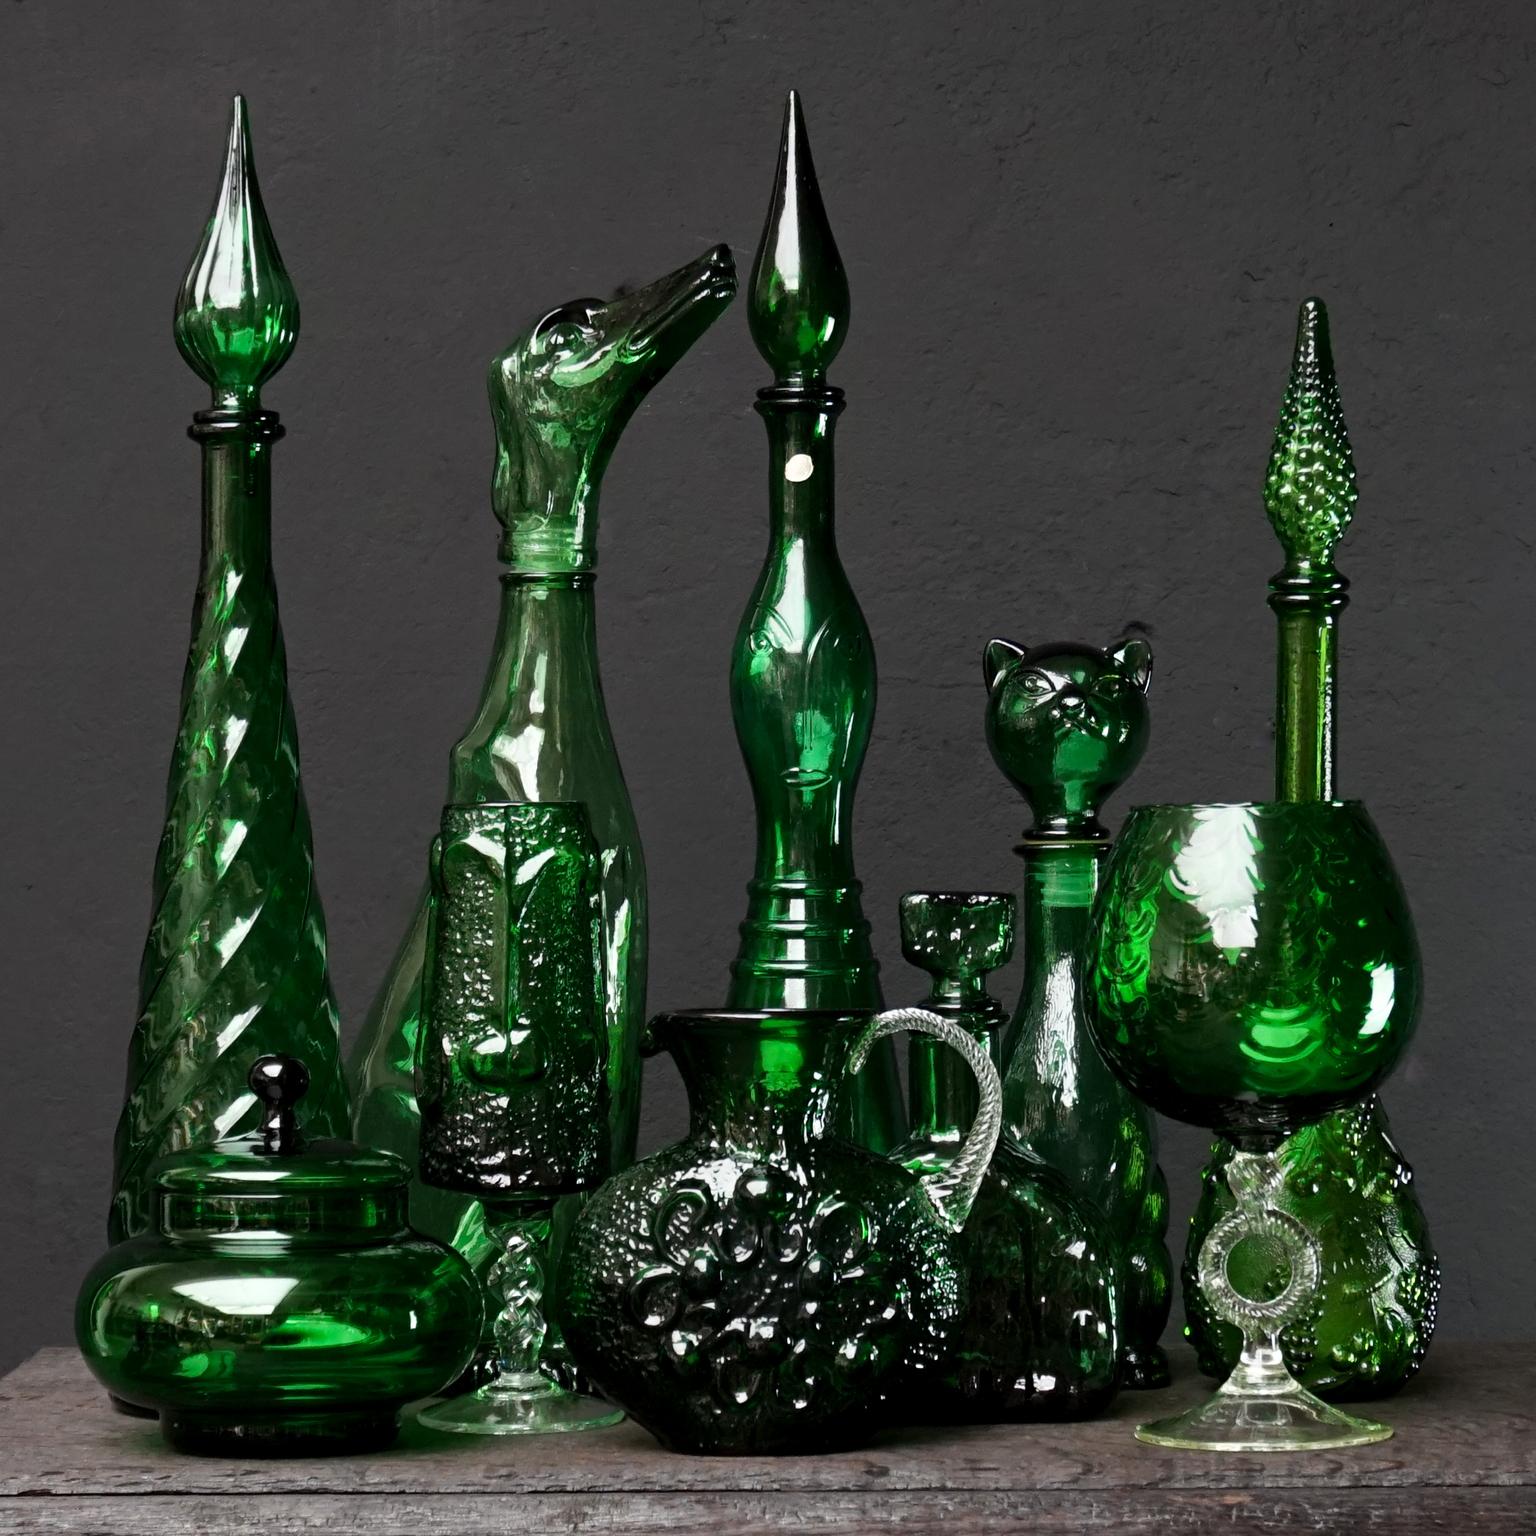 Spectacular set of ten 1960s green Italian Empoli pressed and blown glass. Three genie bottles, a large dog shaped bottle and a cute cat shaped one. A large goblet, a high glass and pitcher by Wayne Husted. A Brutalist 'rock' shaped decanter a last